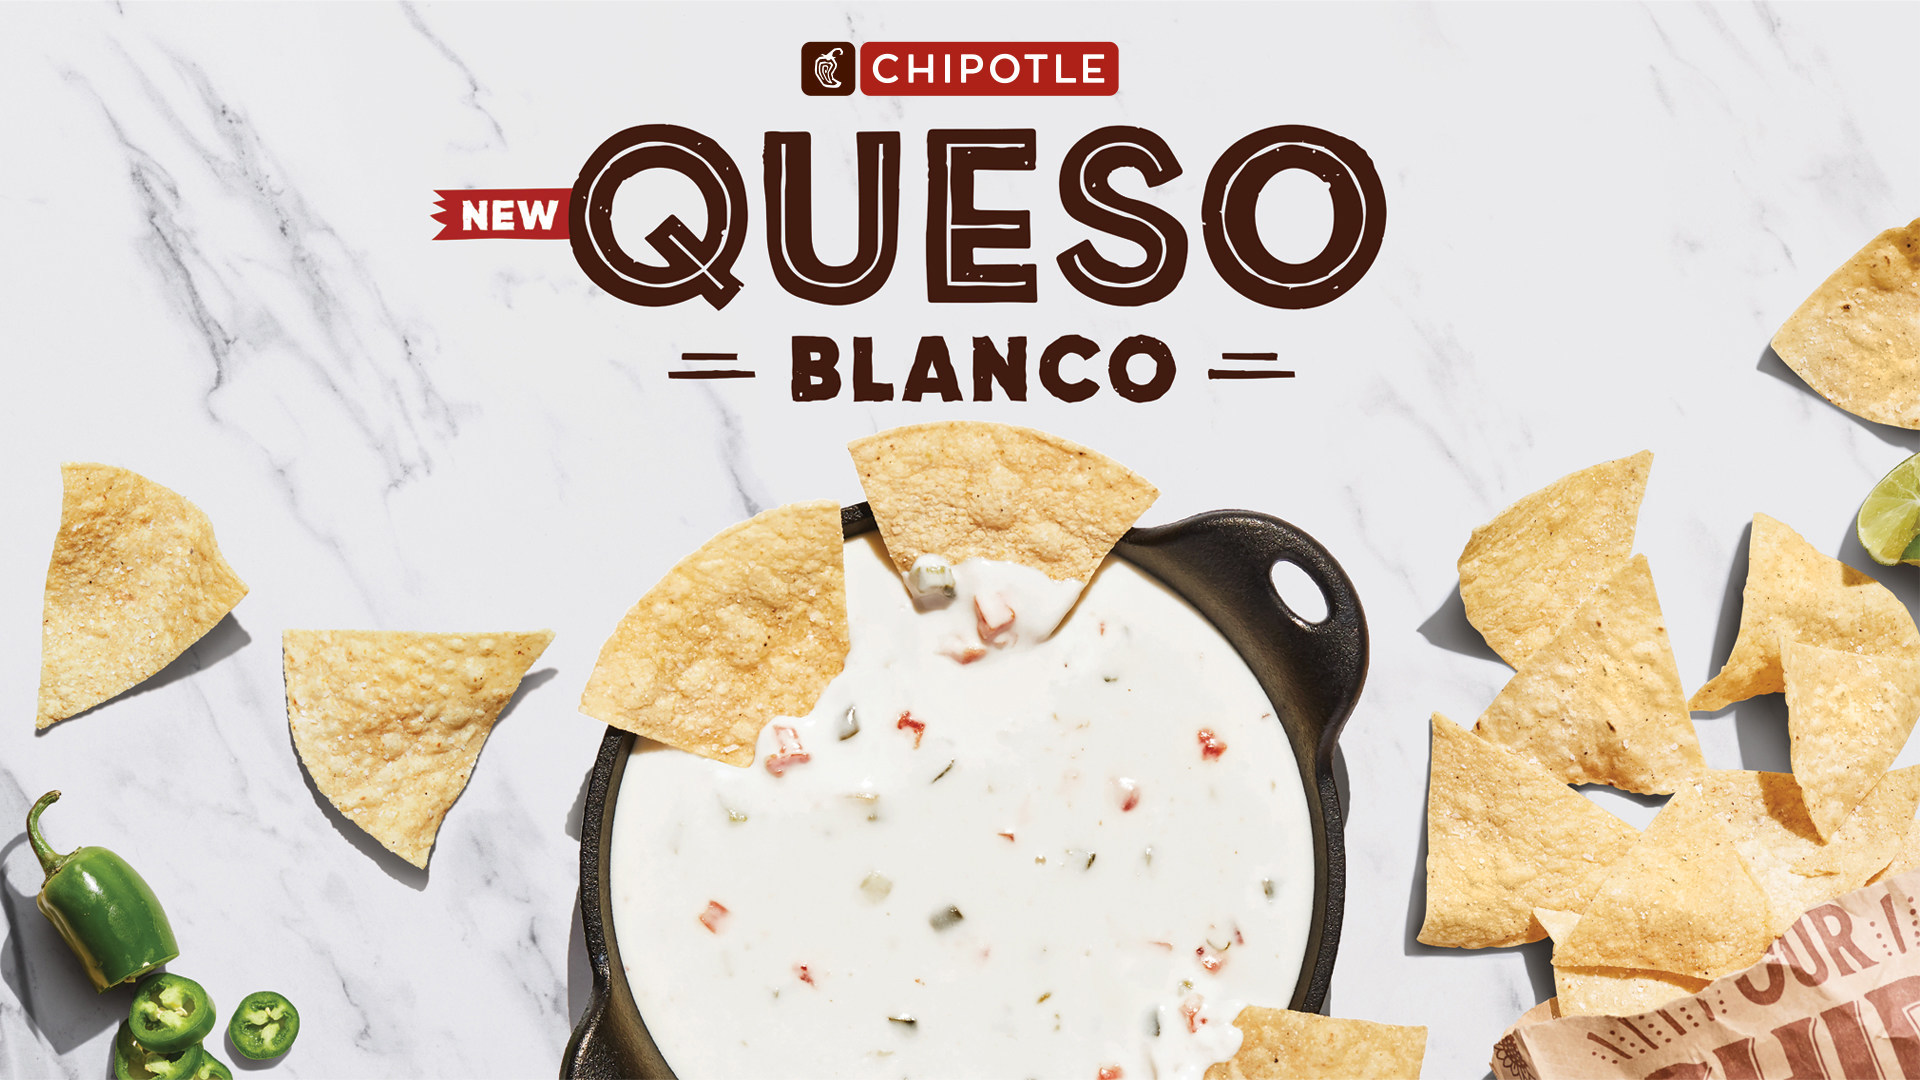 Chipotle Launches New Queso Blanco Nationwide Feb 26, 2020